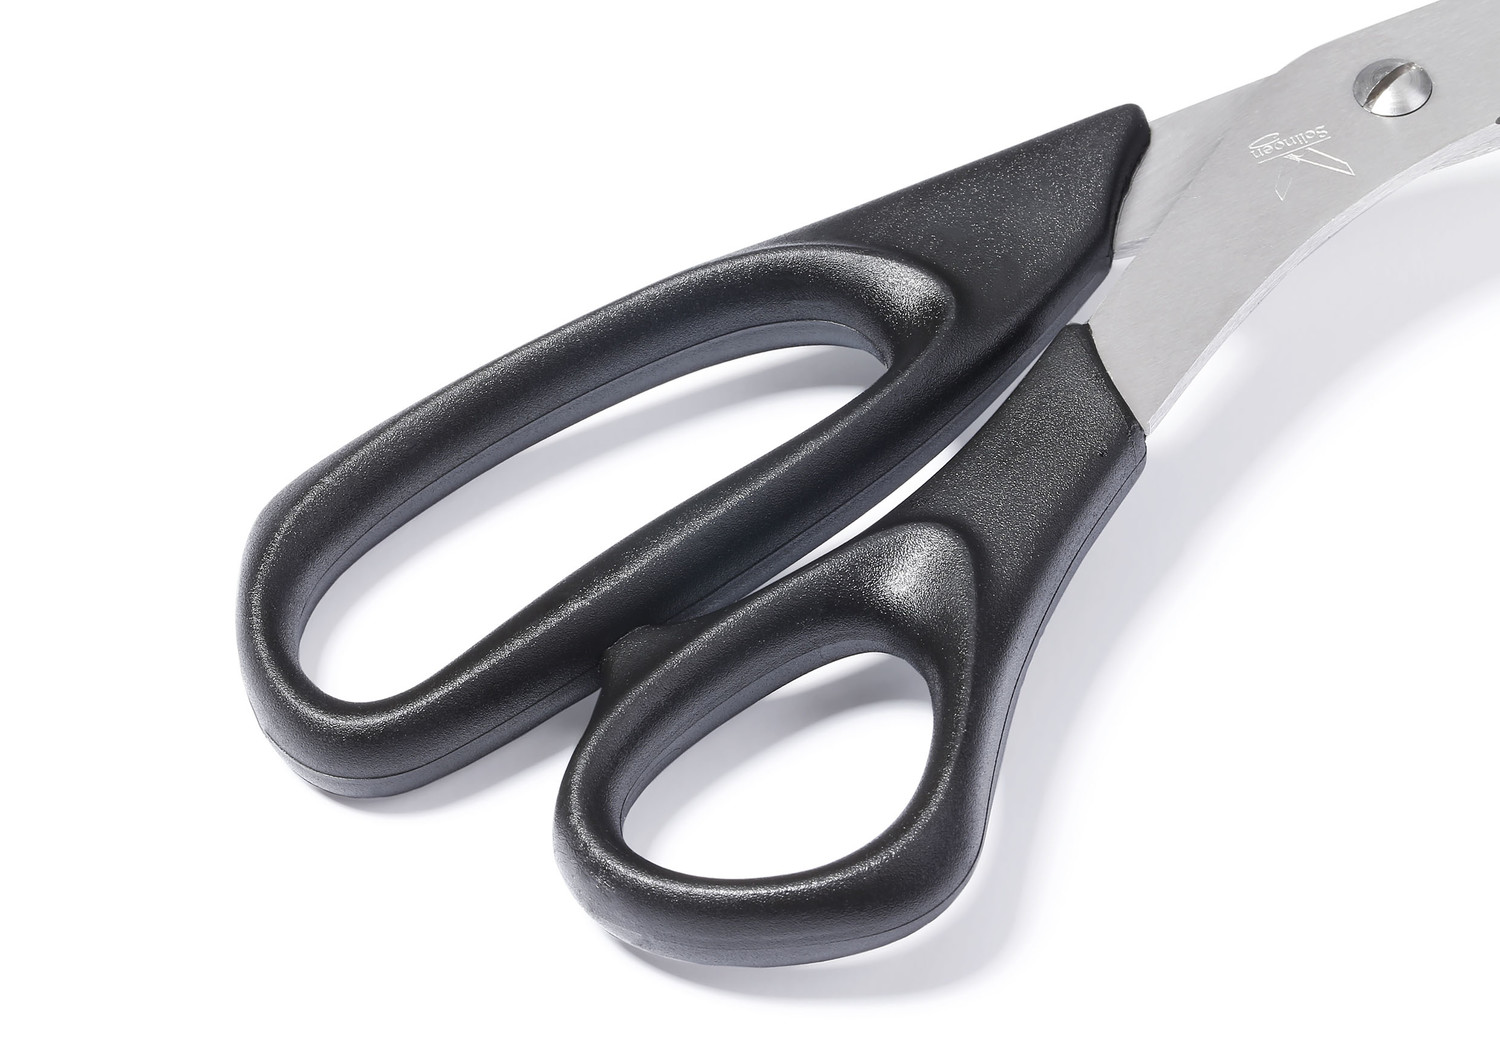 Robust scissor handles made of high-impact proof ABS plastic.